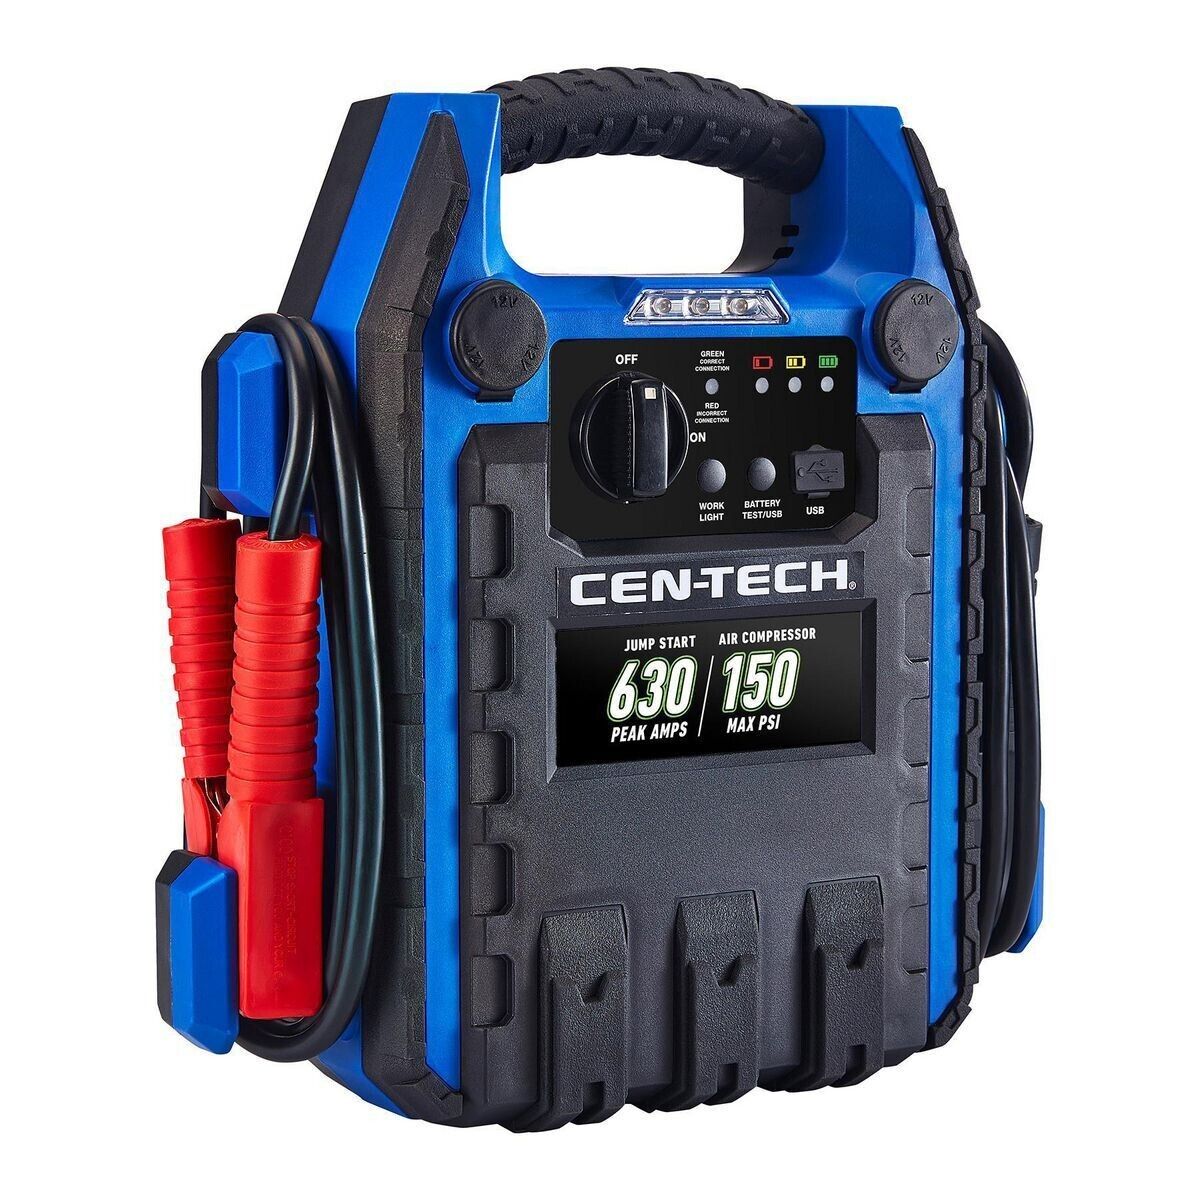 Close-up of the CEN-TECH Jump Starter's 150 PSI air compressor, ready for any tire emergency.